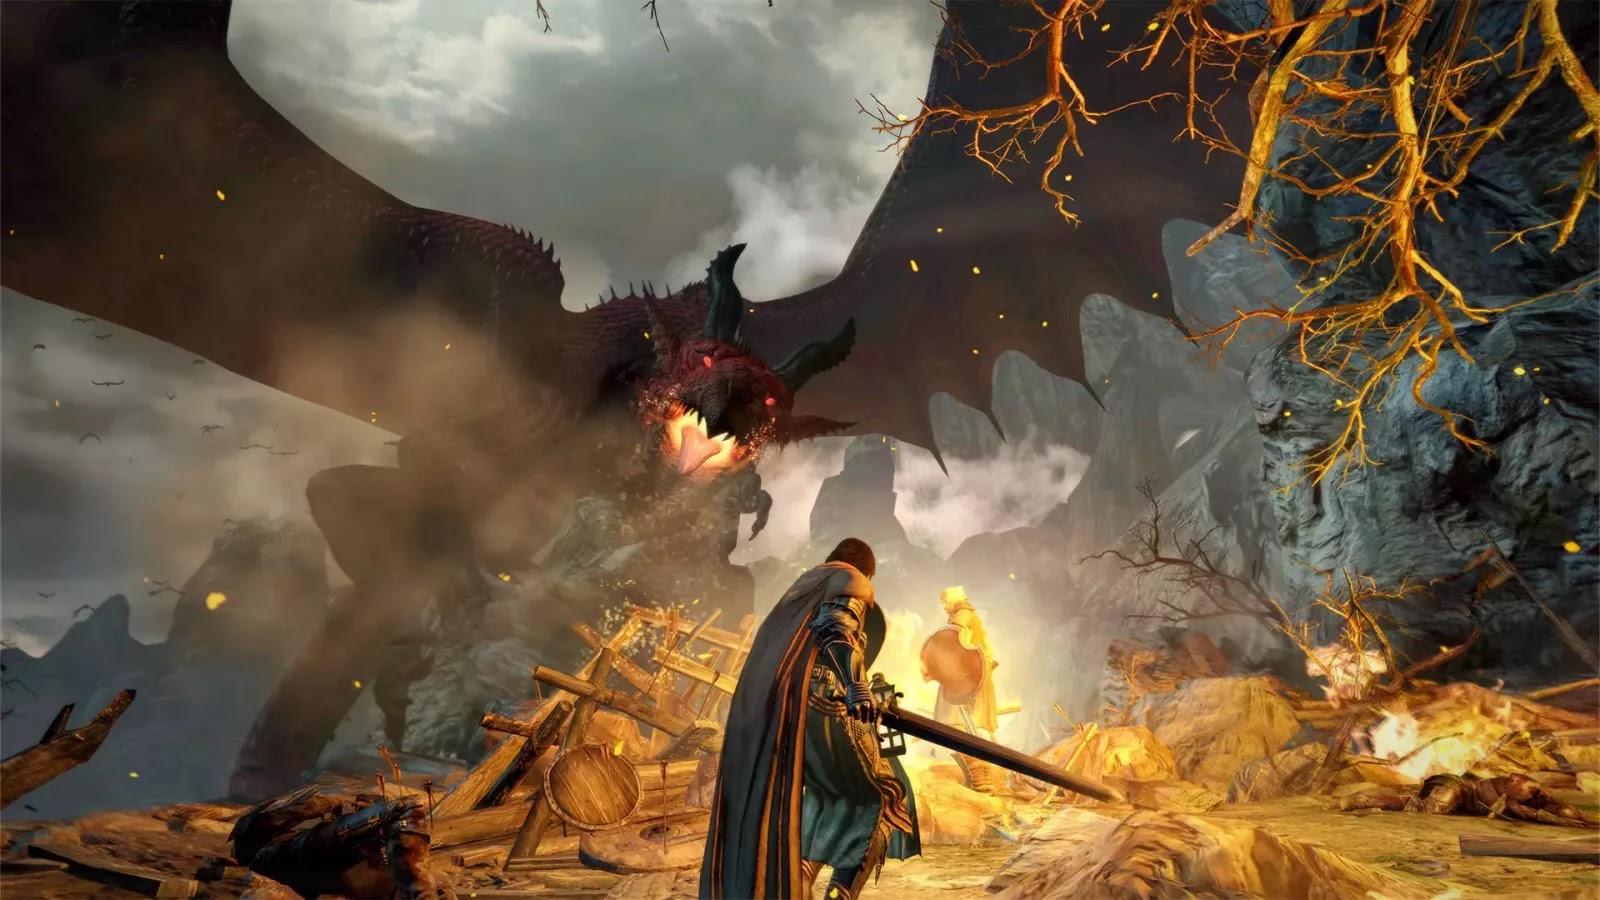 Dragon's Dogma 2 is Capcom's first $70 game